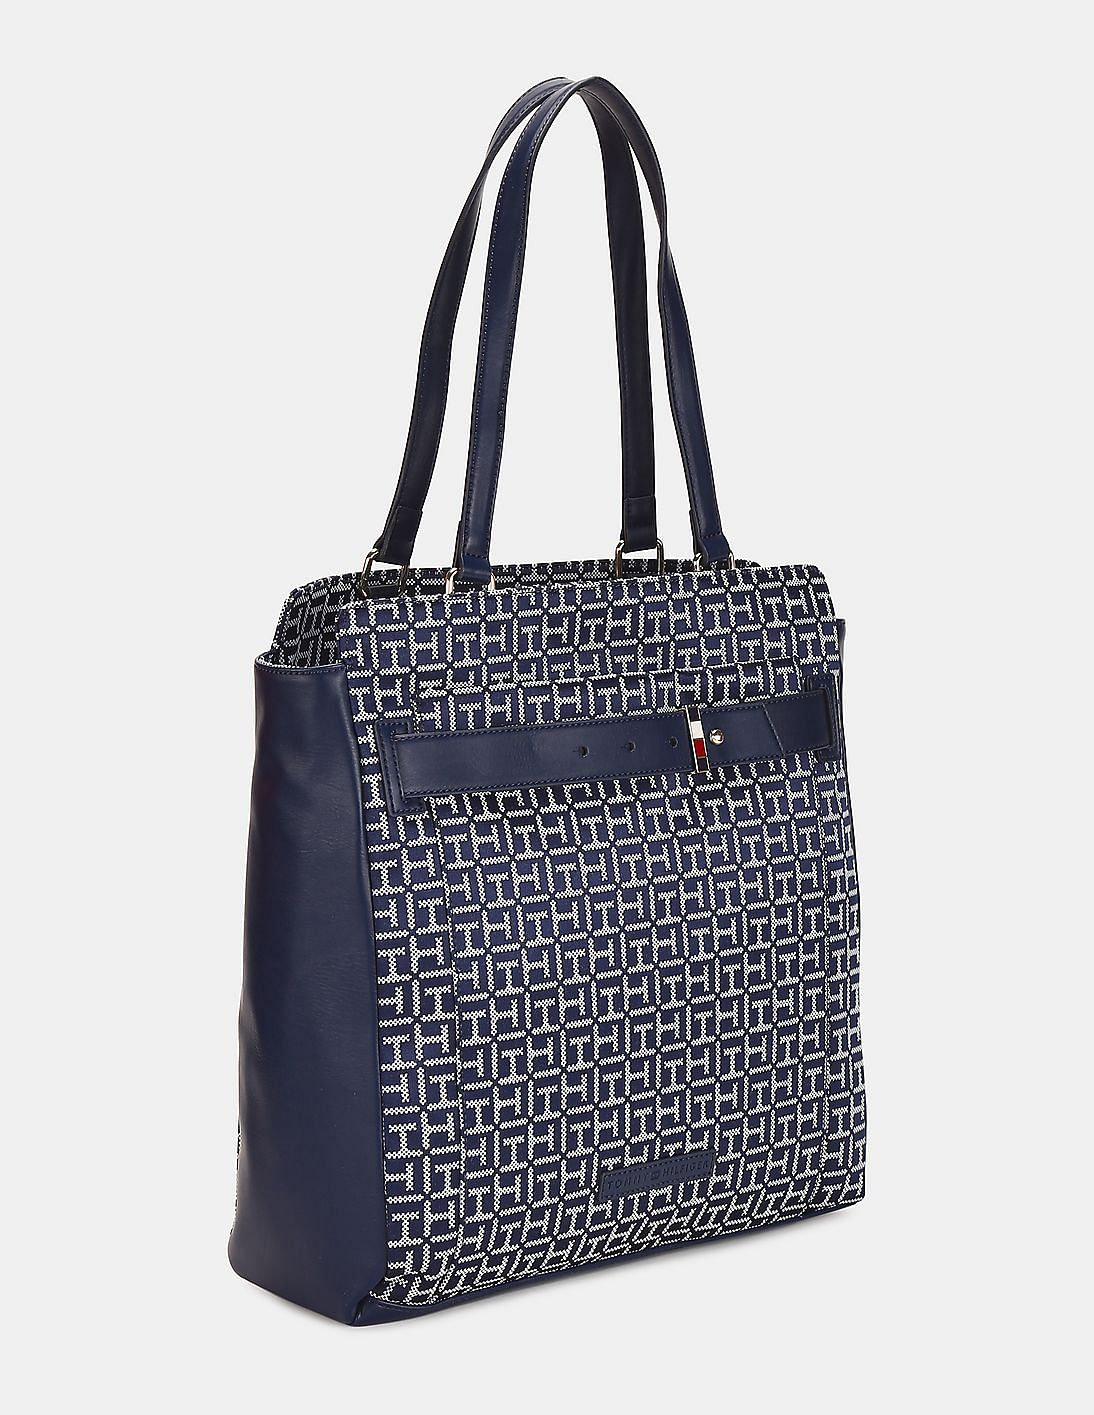 TOMMY HILFIGER Jacquard Zipper Closure Women's Casual Tote Bag(Tote), Shop Now at ShopperStop.com, India's No.1 Online Shopping Destination